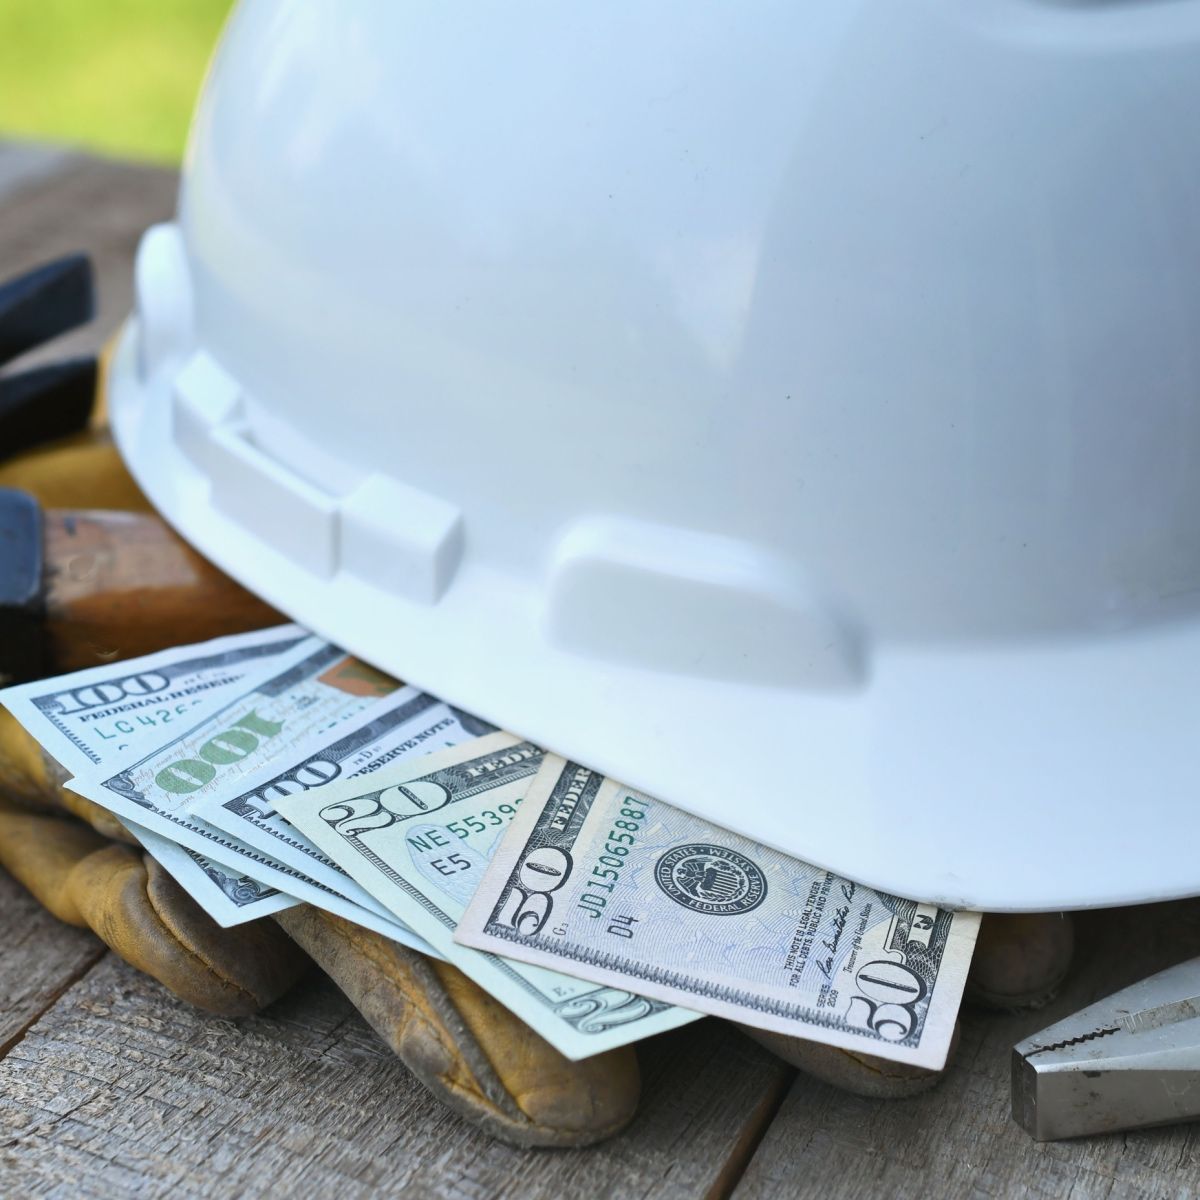 Work with a reputable Houston home contractor